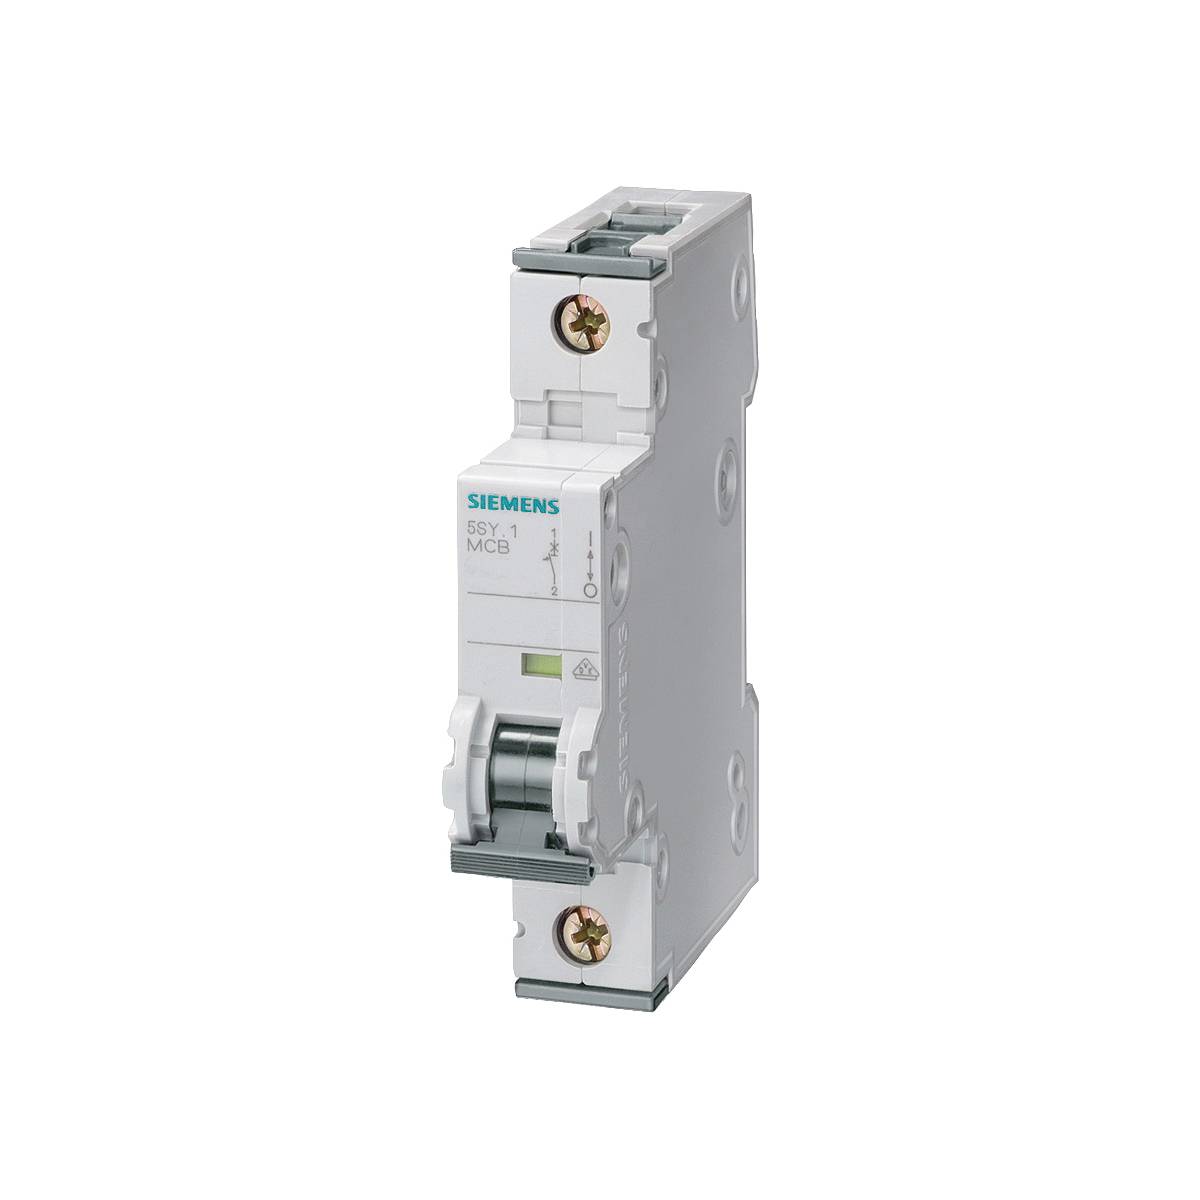 Siemens 5SY4101-8 Supplementary Protector, 480 VAC, 1 A, 5 kA Interrupt, 1 Poles, Thermal/Magnetic Trip